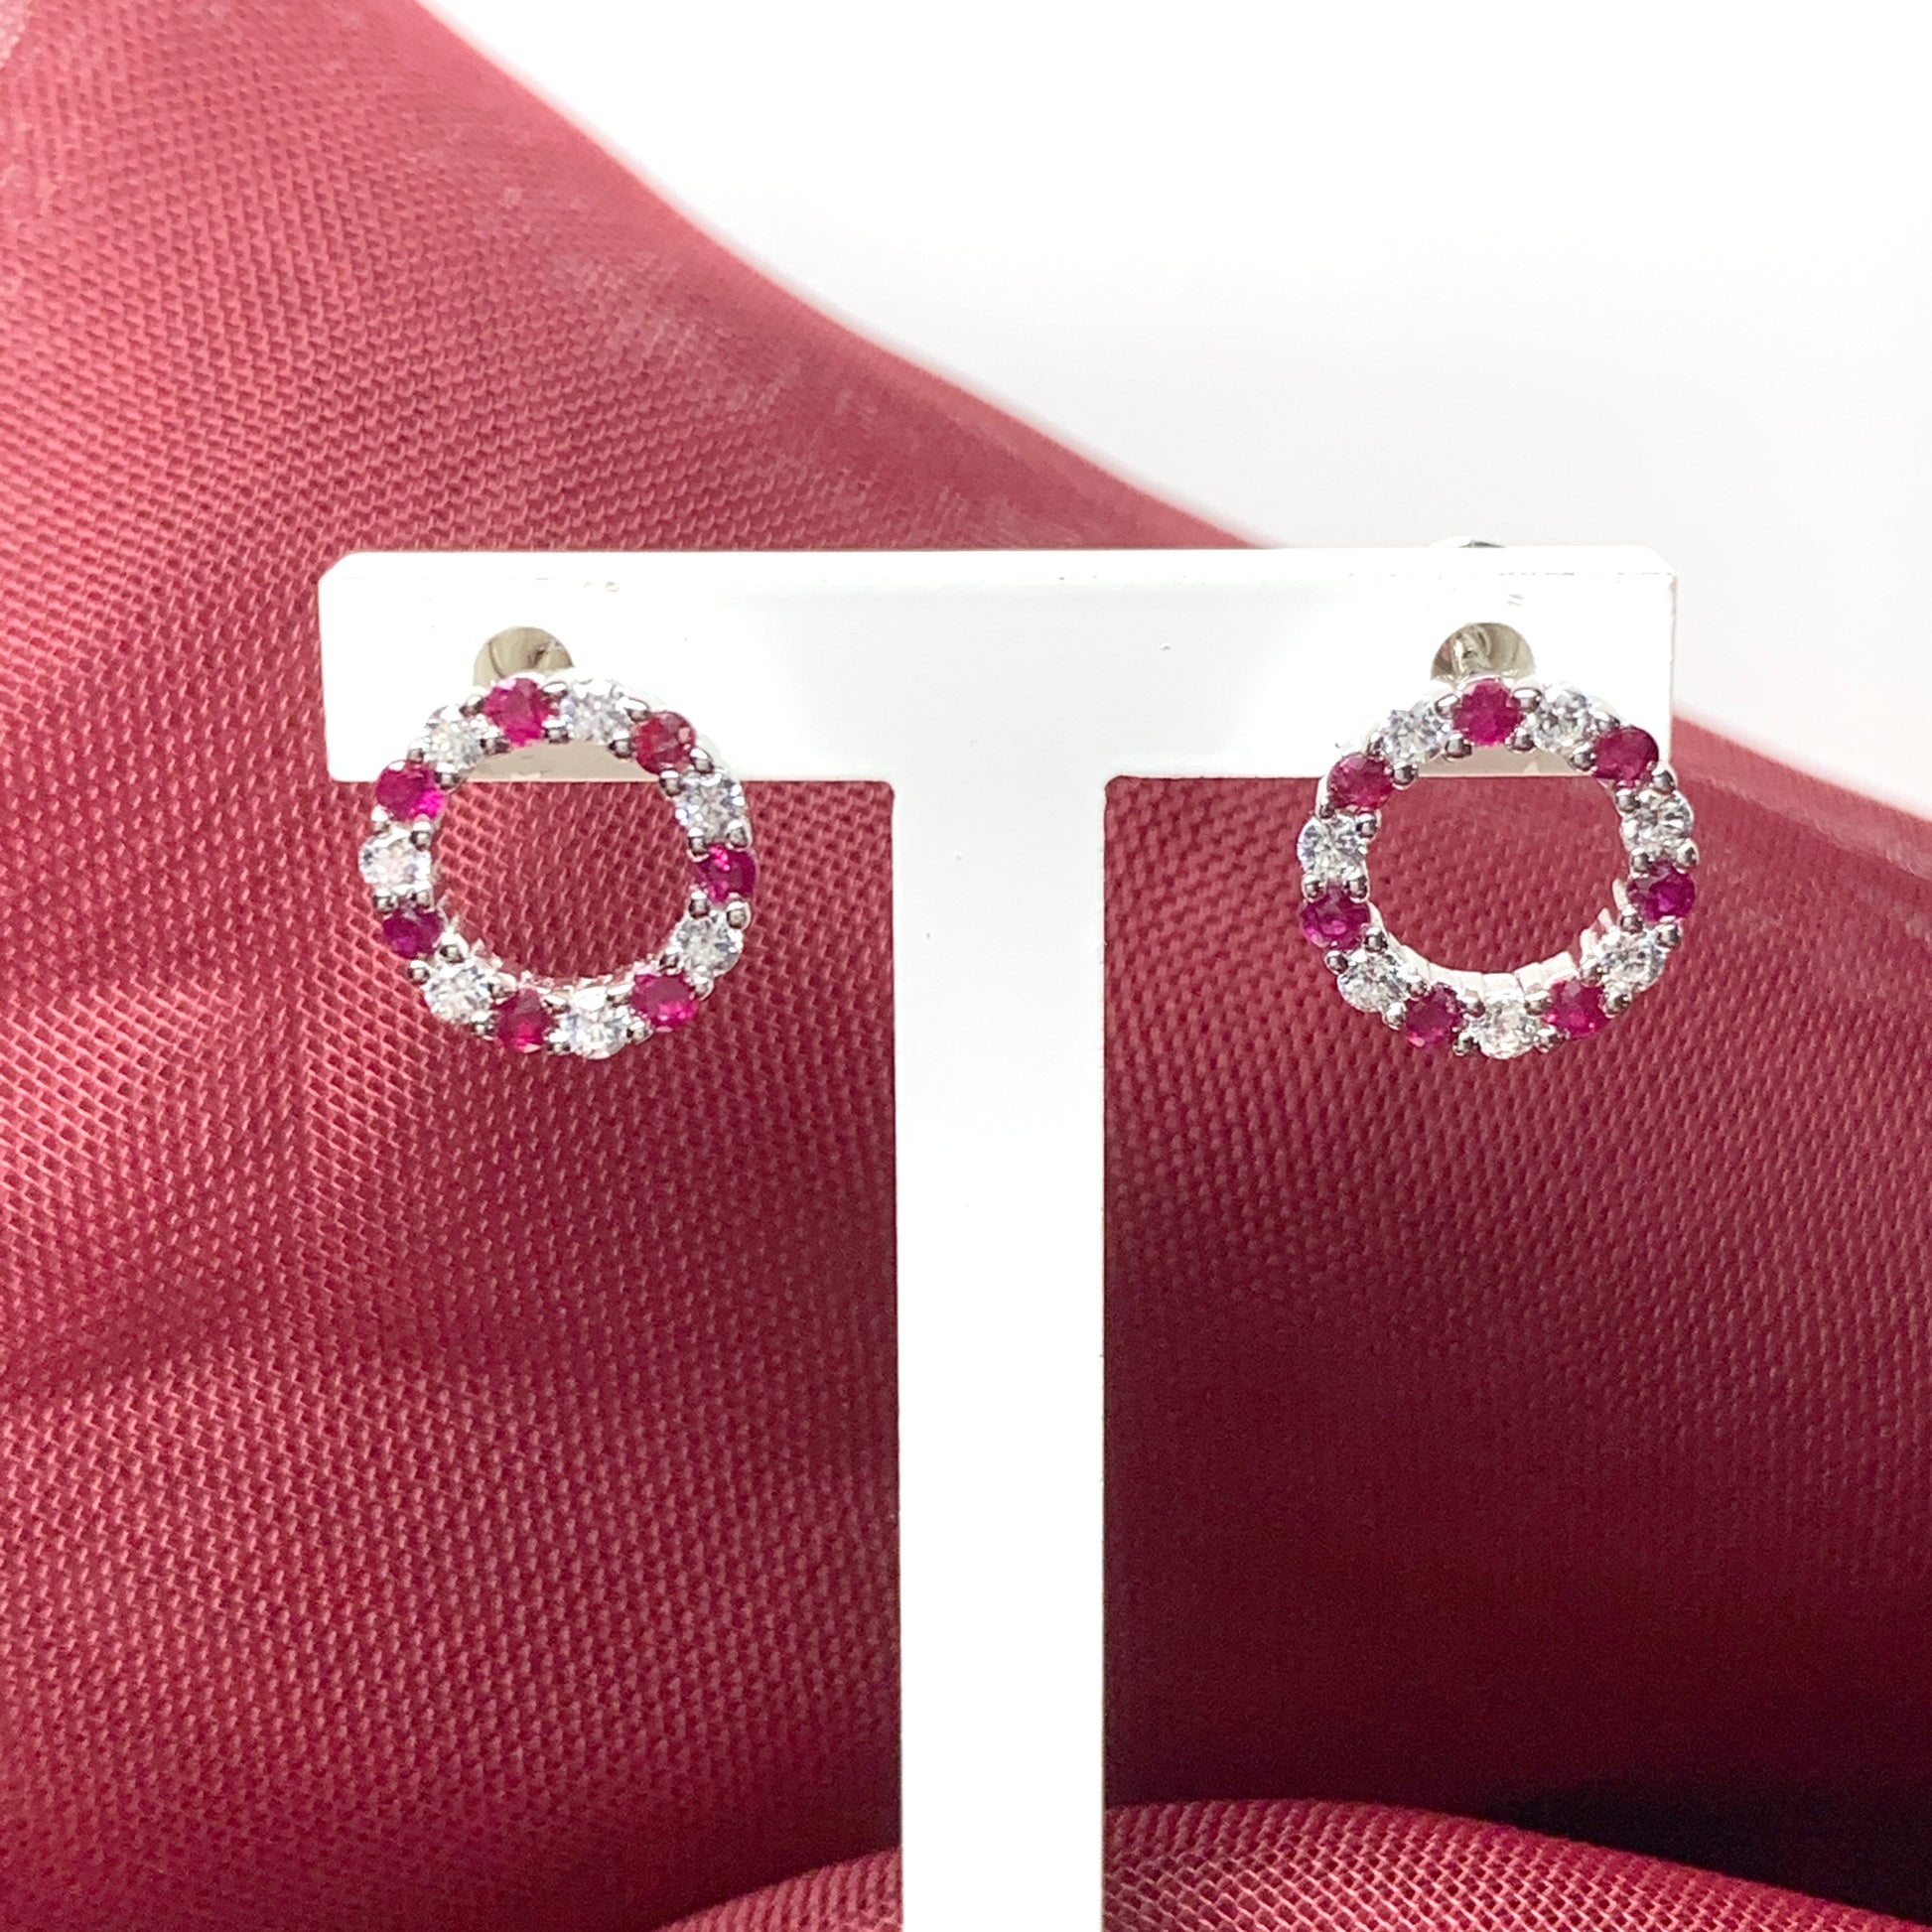 Round red ruby and cubic zirconia sterling silver stud earrings